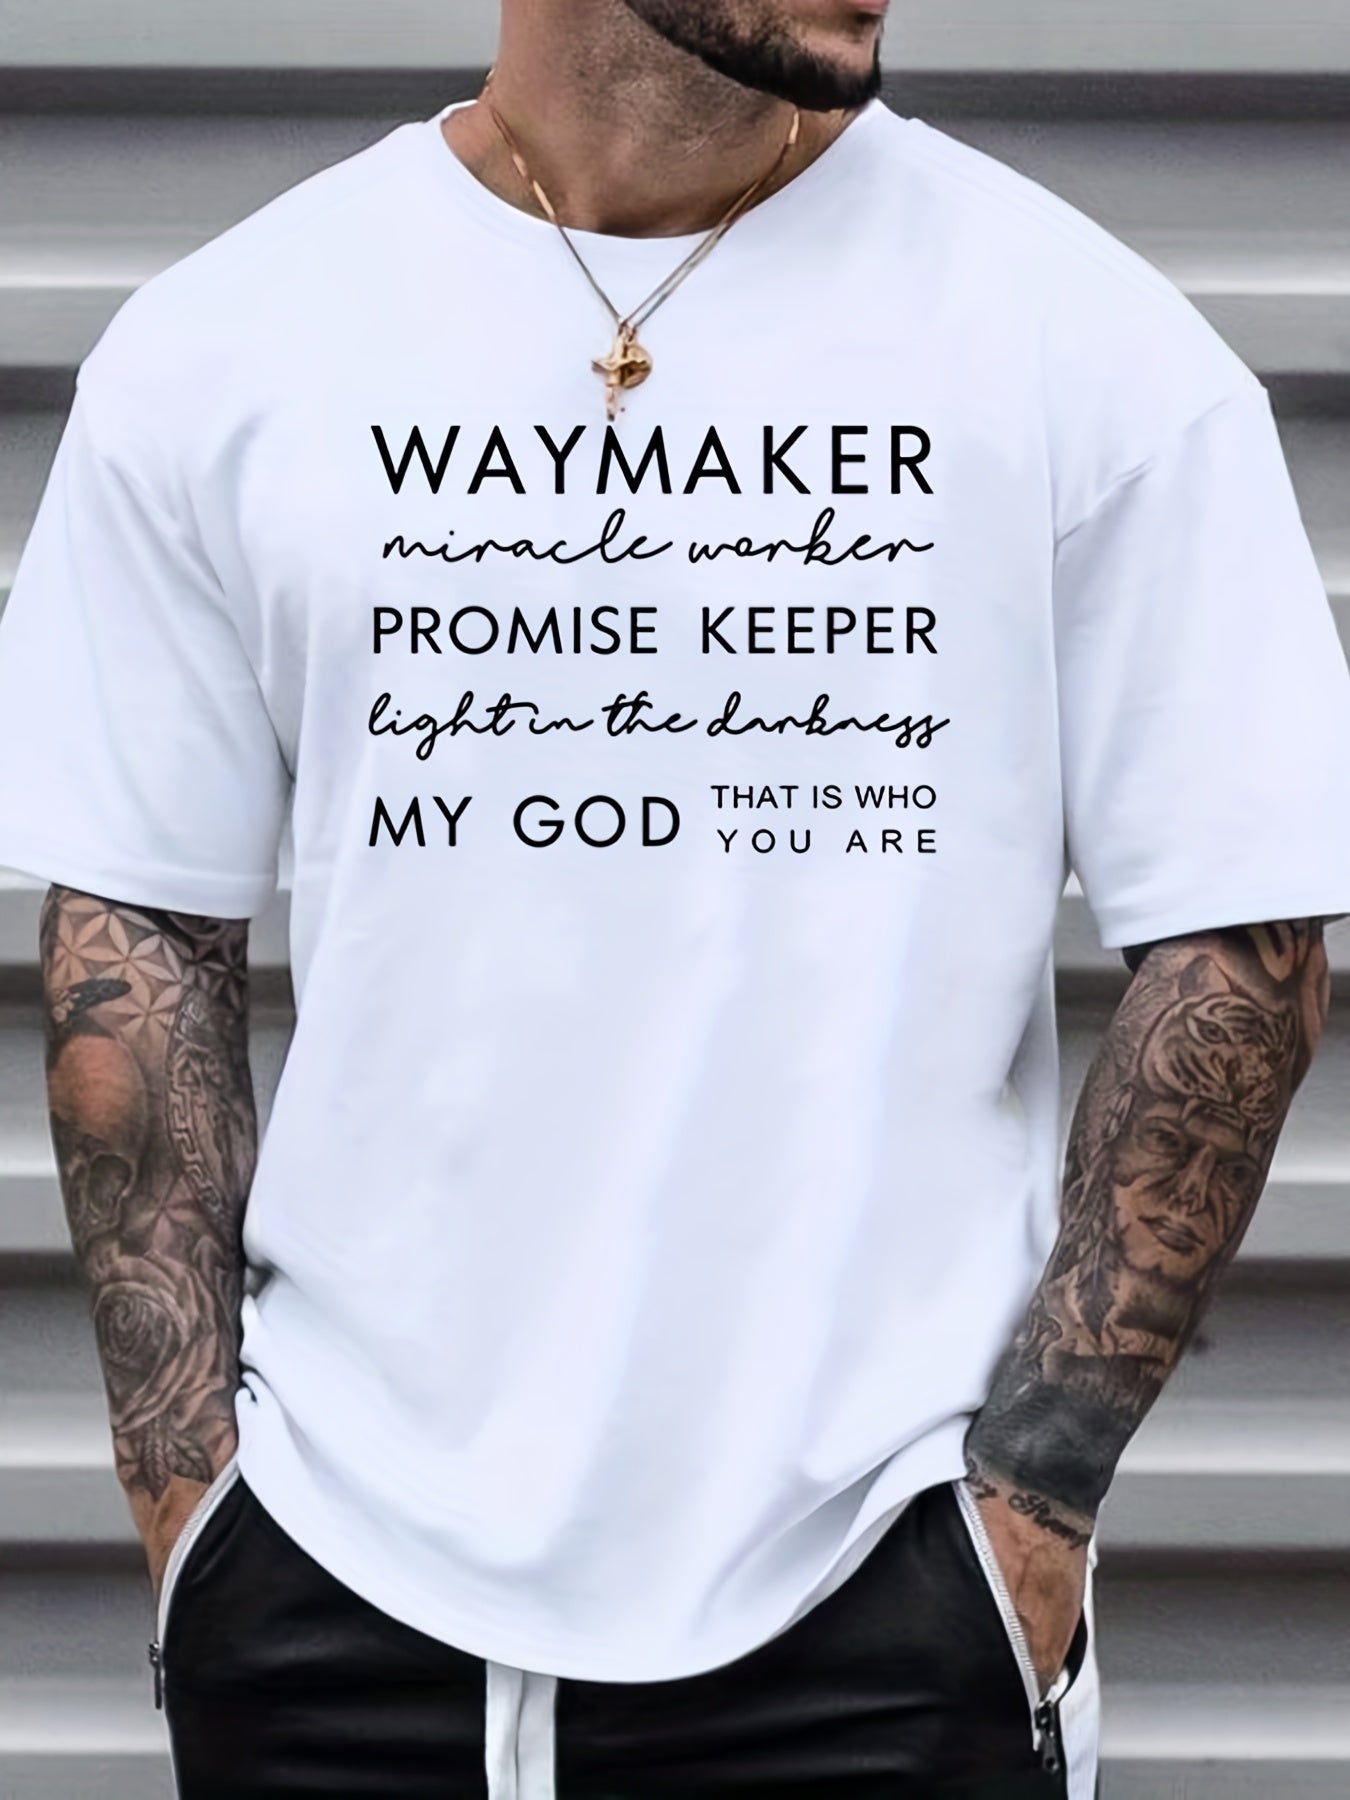 Plus Size Way Maker Men's Casual Trendy Graphic Print Comfortable Crew Neck Short Sleeve T-shirts, Summer Oversized Loose Tees